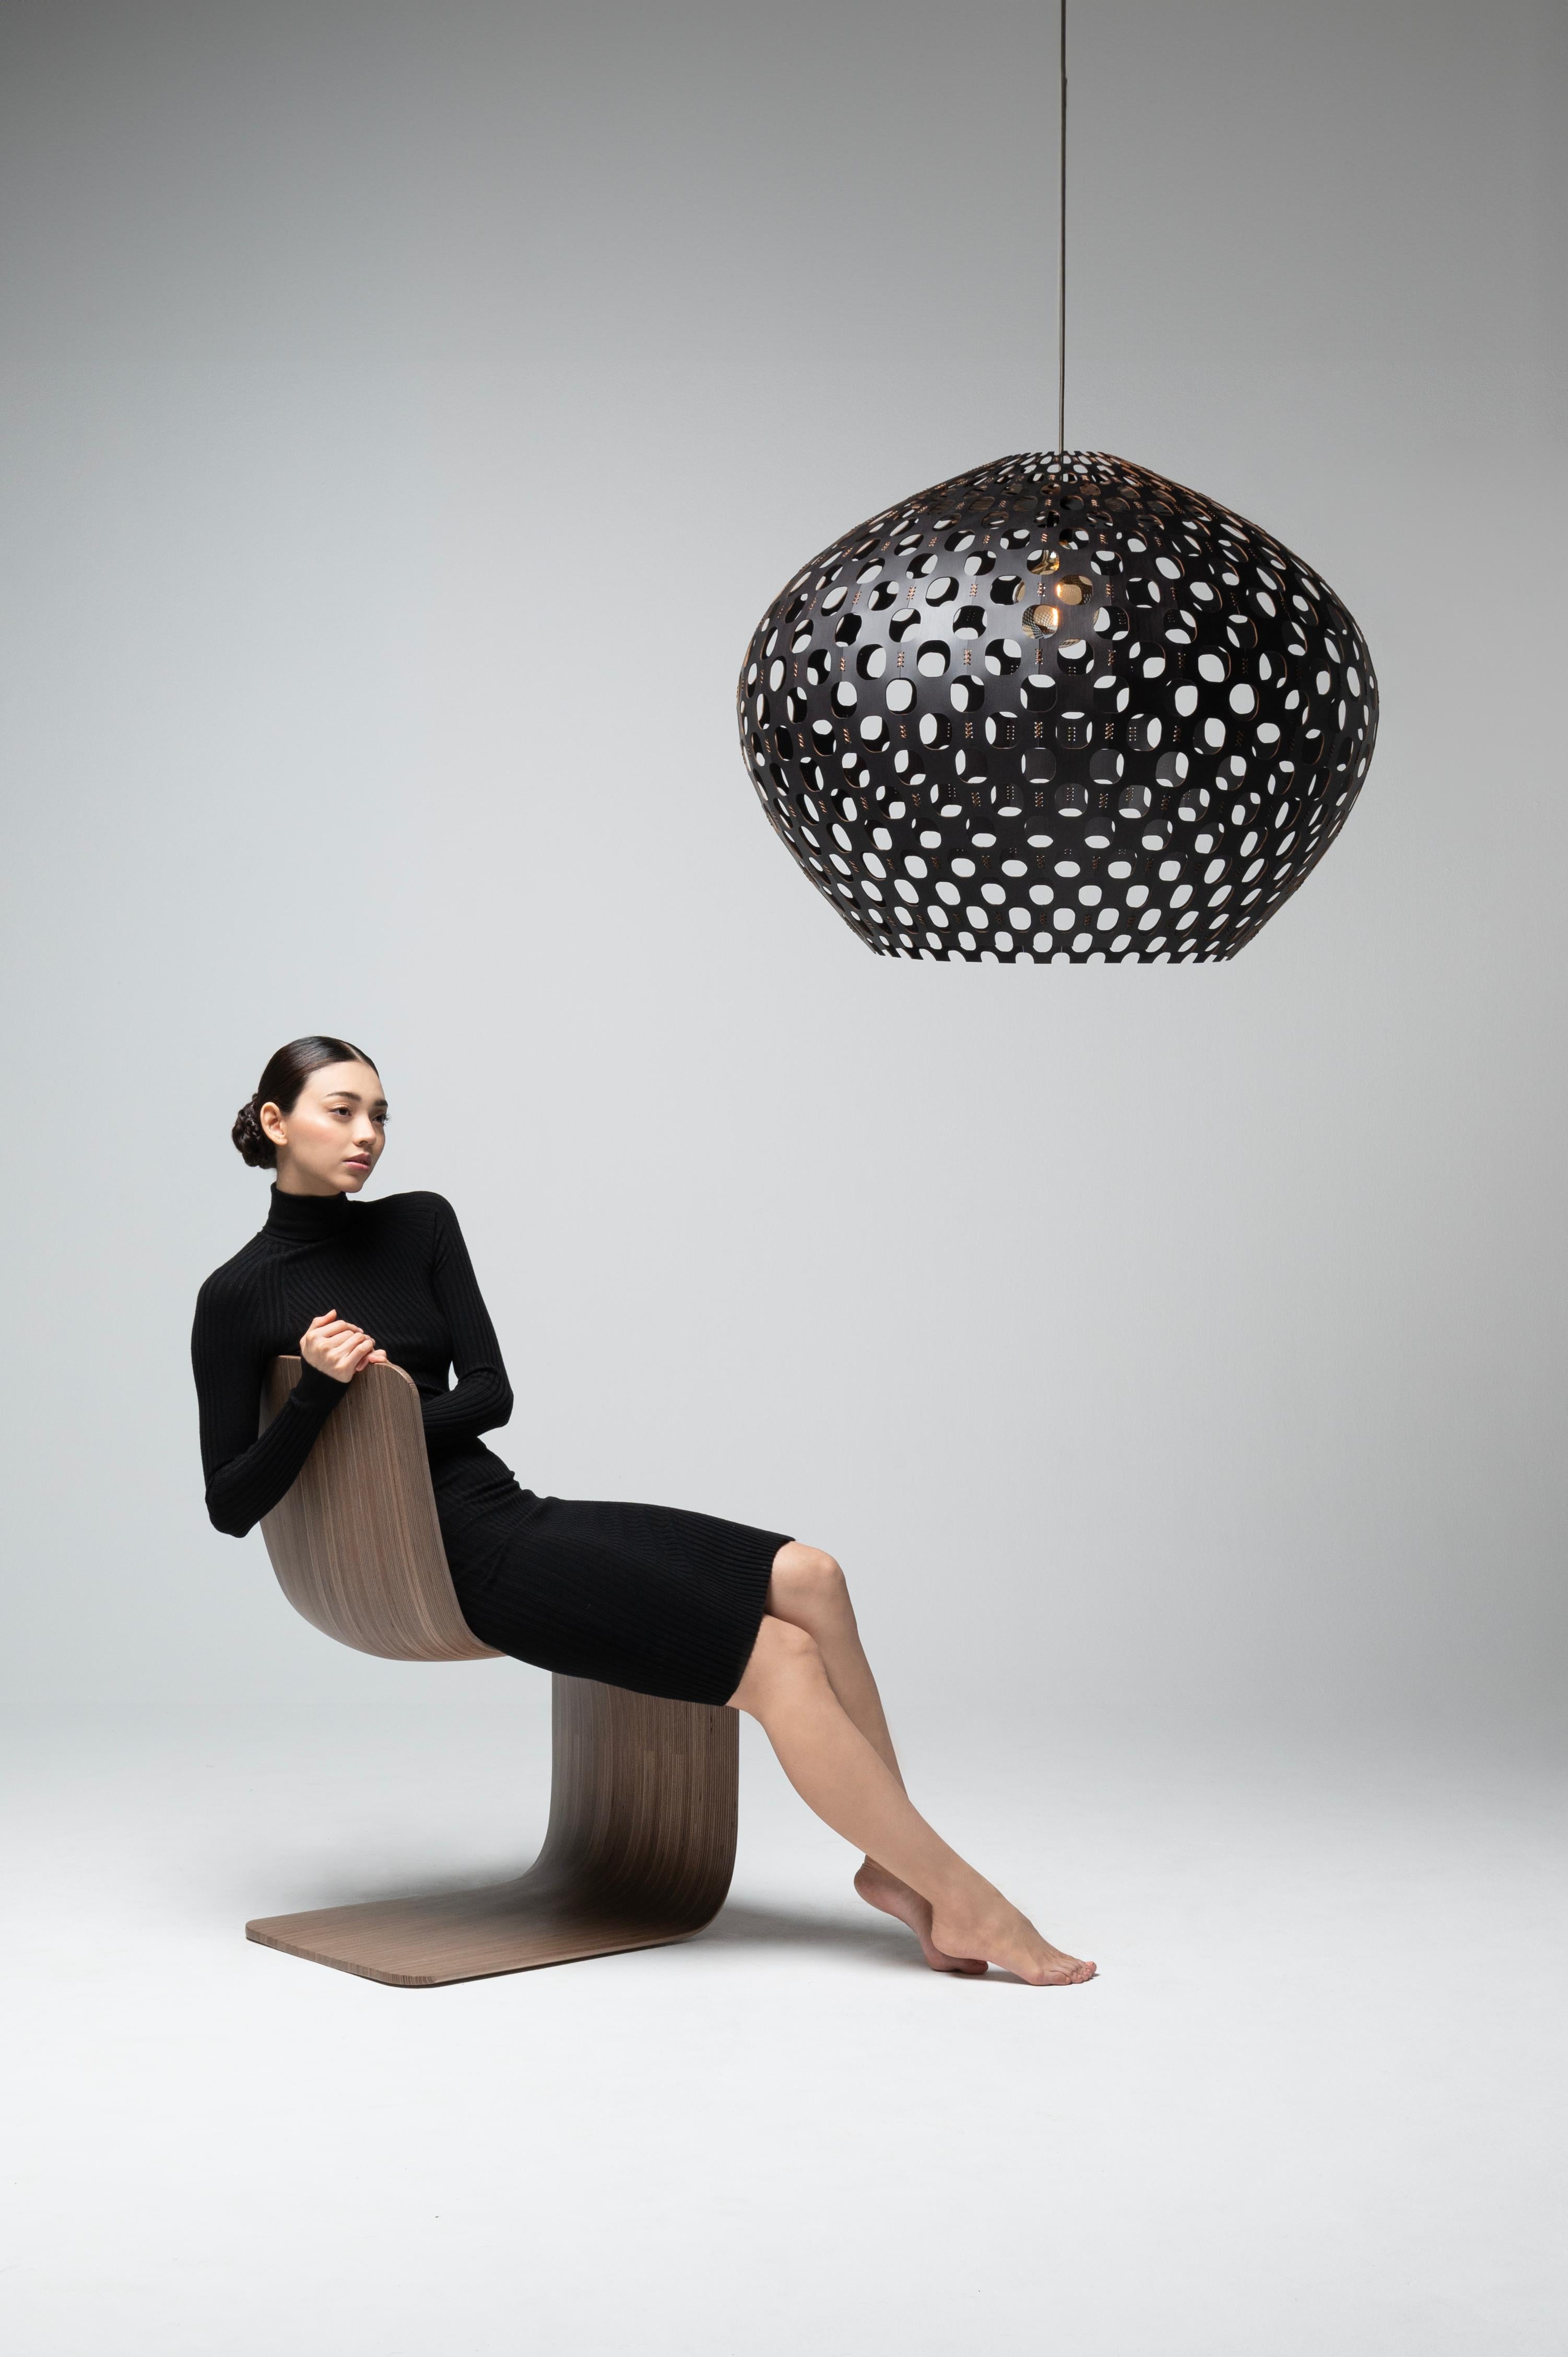 Hand-Woven Panelitos Sphere Lamp Medium by Piegatto, a Contemporary Sculptural Lamp For Sale